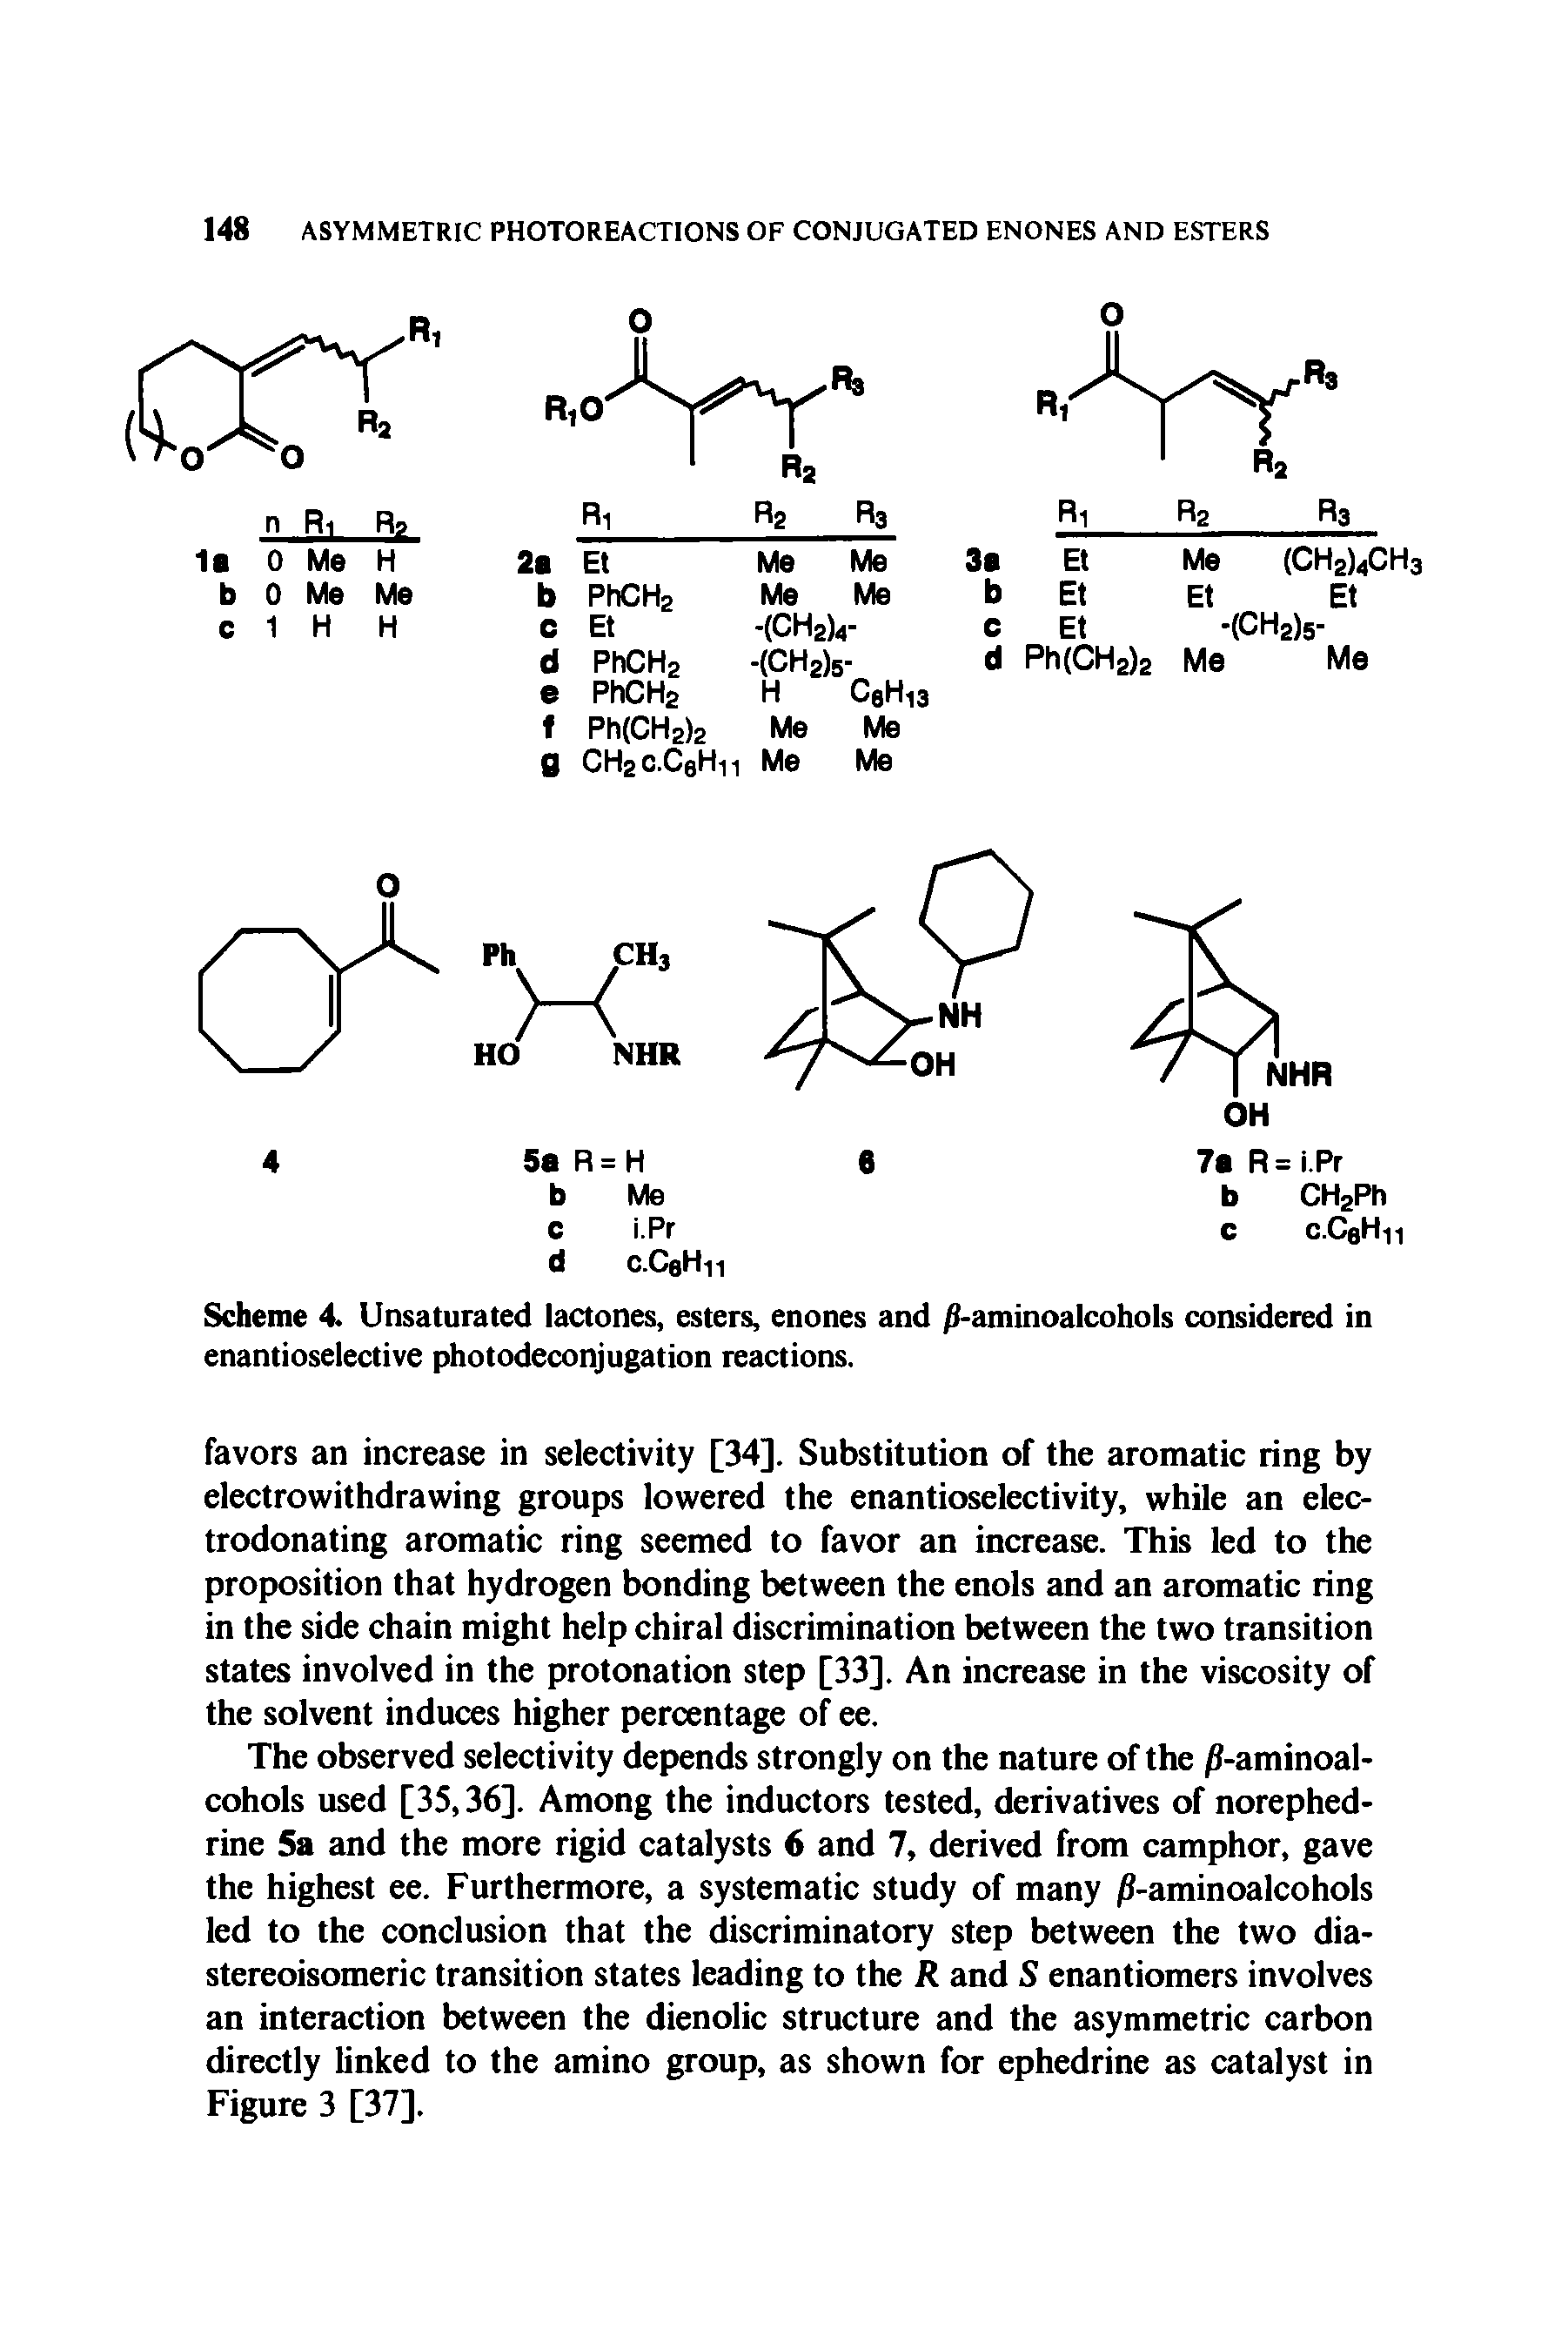 Scheme 4. Unsaturated lactones, esters, enones and -aminoalcohols considered in enantioselective photodeconjugation reactions.